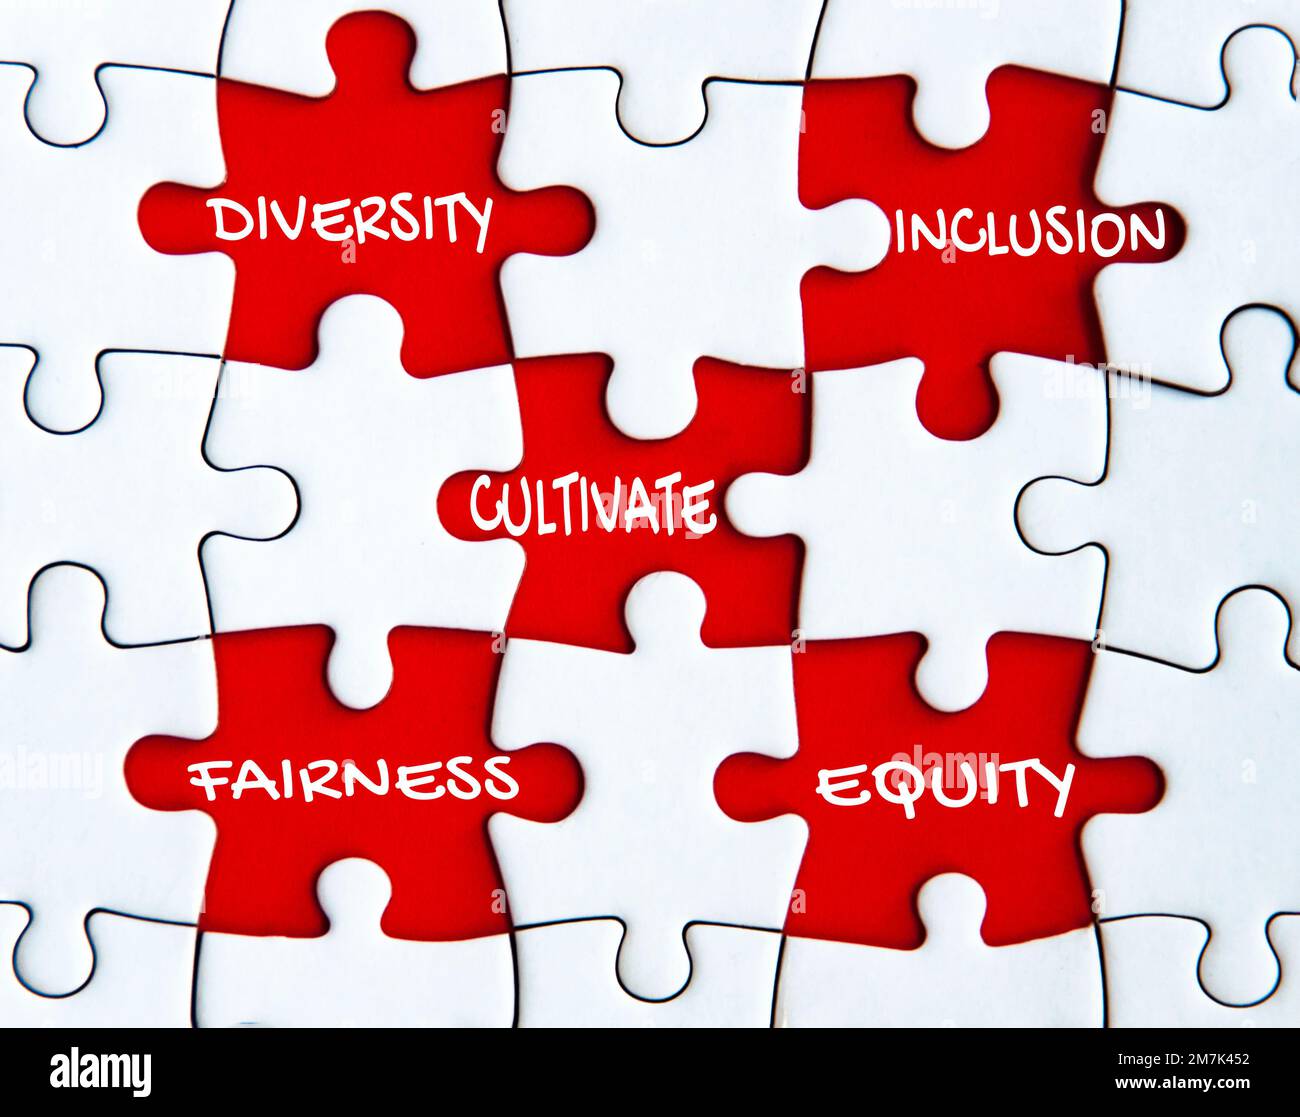 Cultivate diversity, inclusion, fairness and equity text on missing jigsaw puzzle Stock Photo